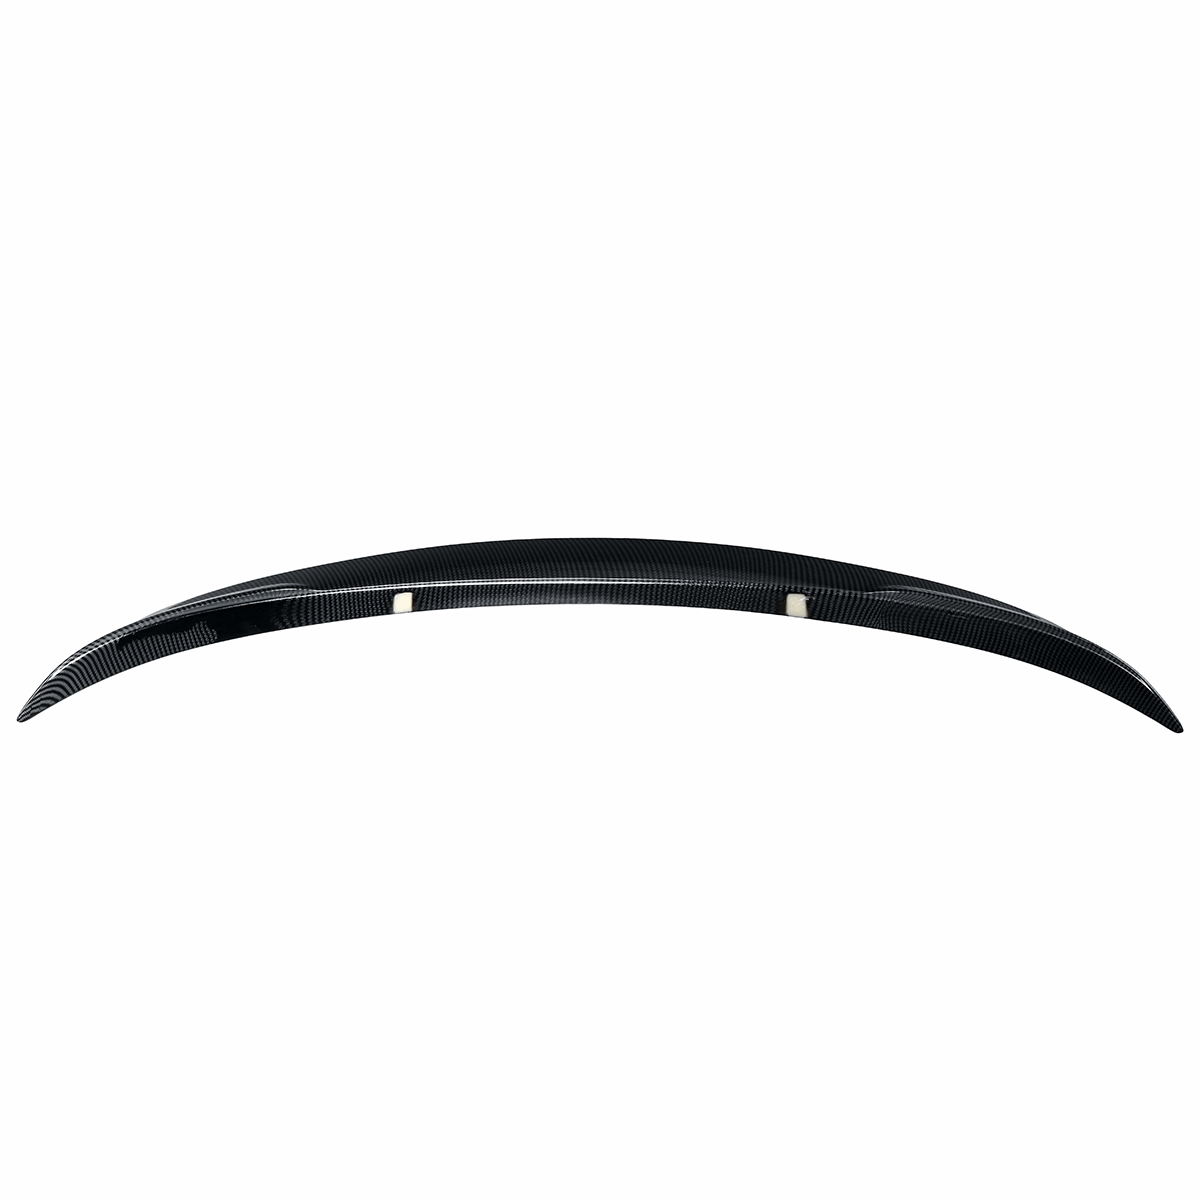 Car-Wing-Spoiler-Rear-Trunk-Boot-Spoiler-P-Style-For-BMW-3-Series-2012-2018-1663033